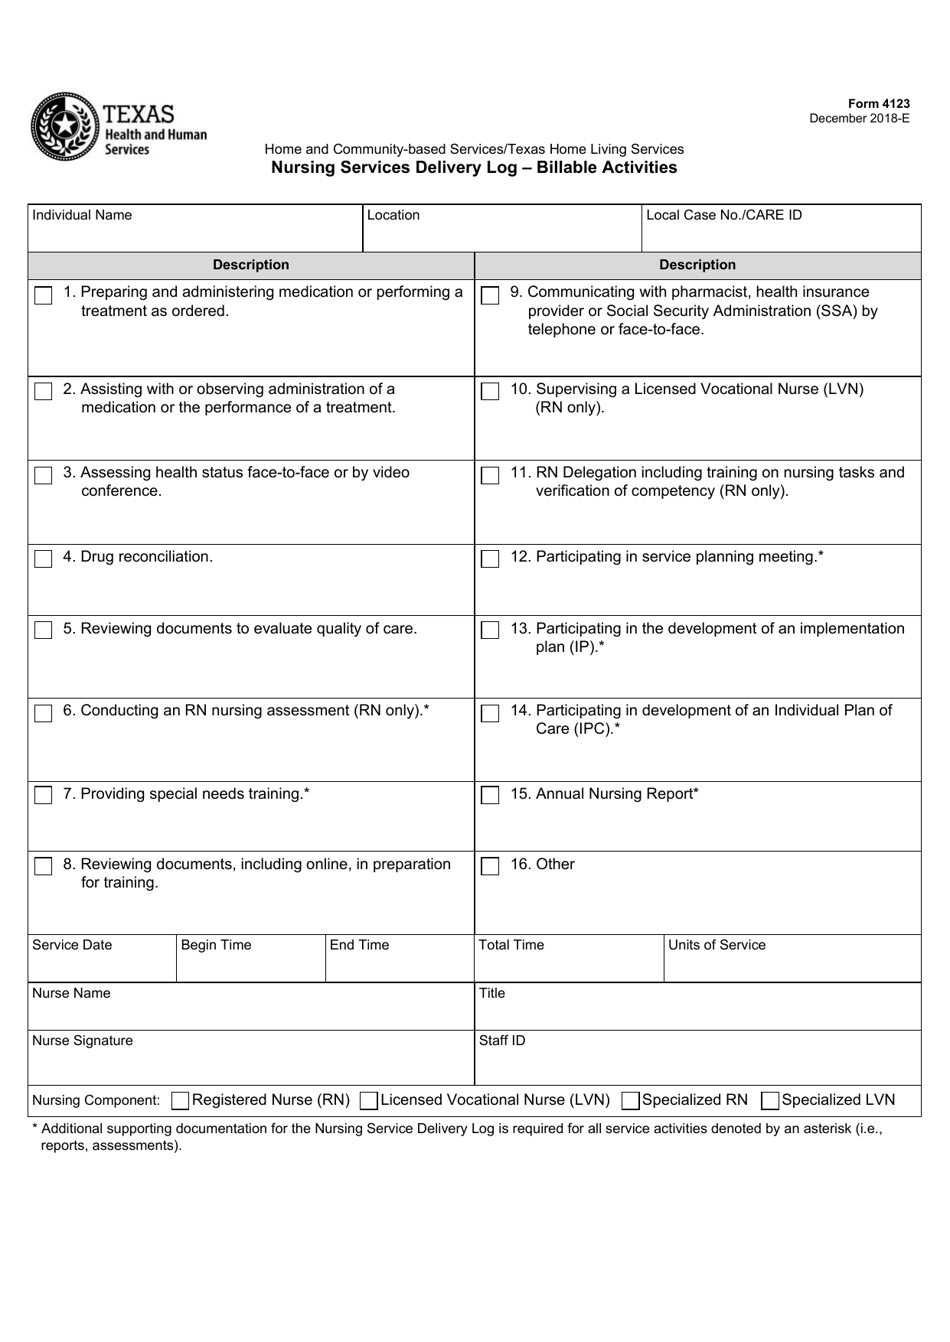 Form 4123 Nursing Services Delivery Log - Billable Activities - Texas, Page 1